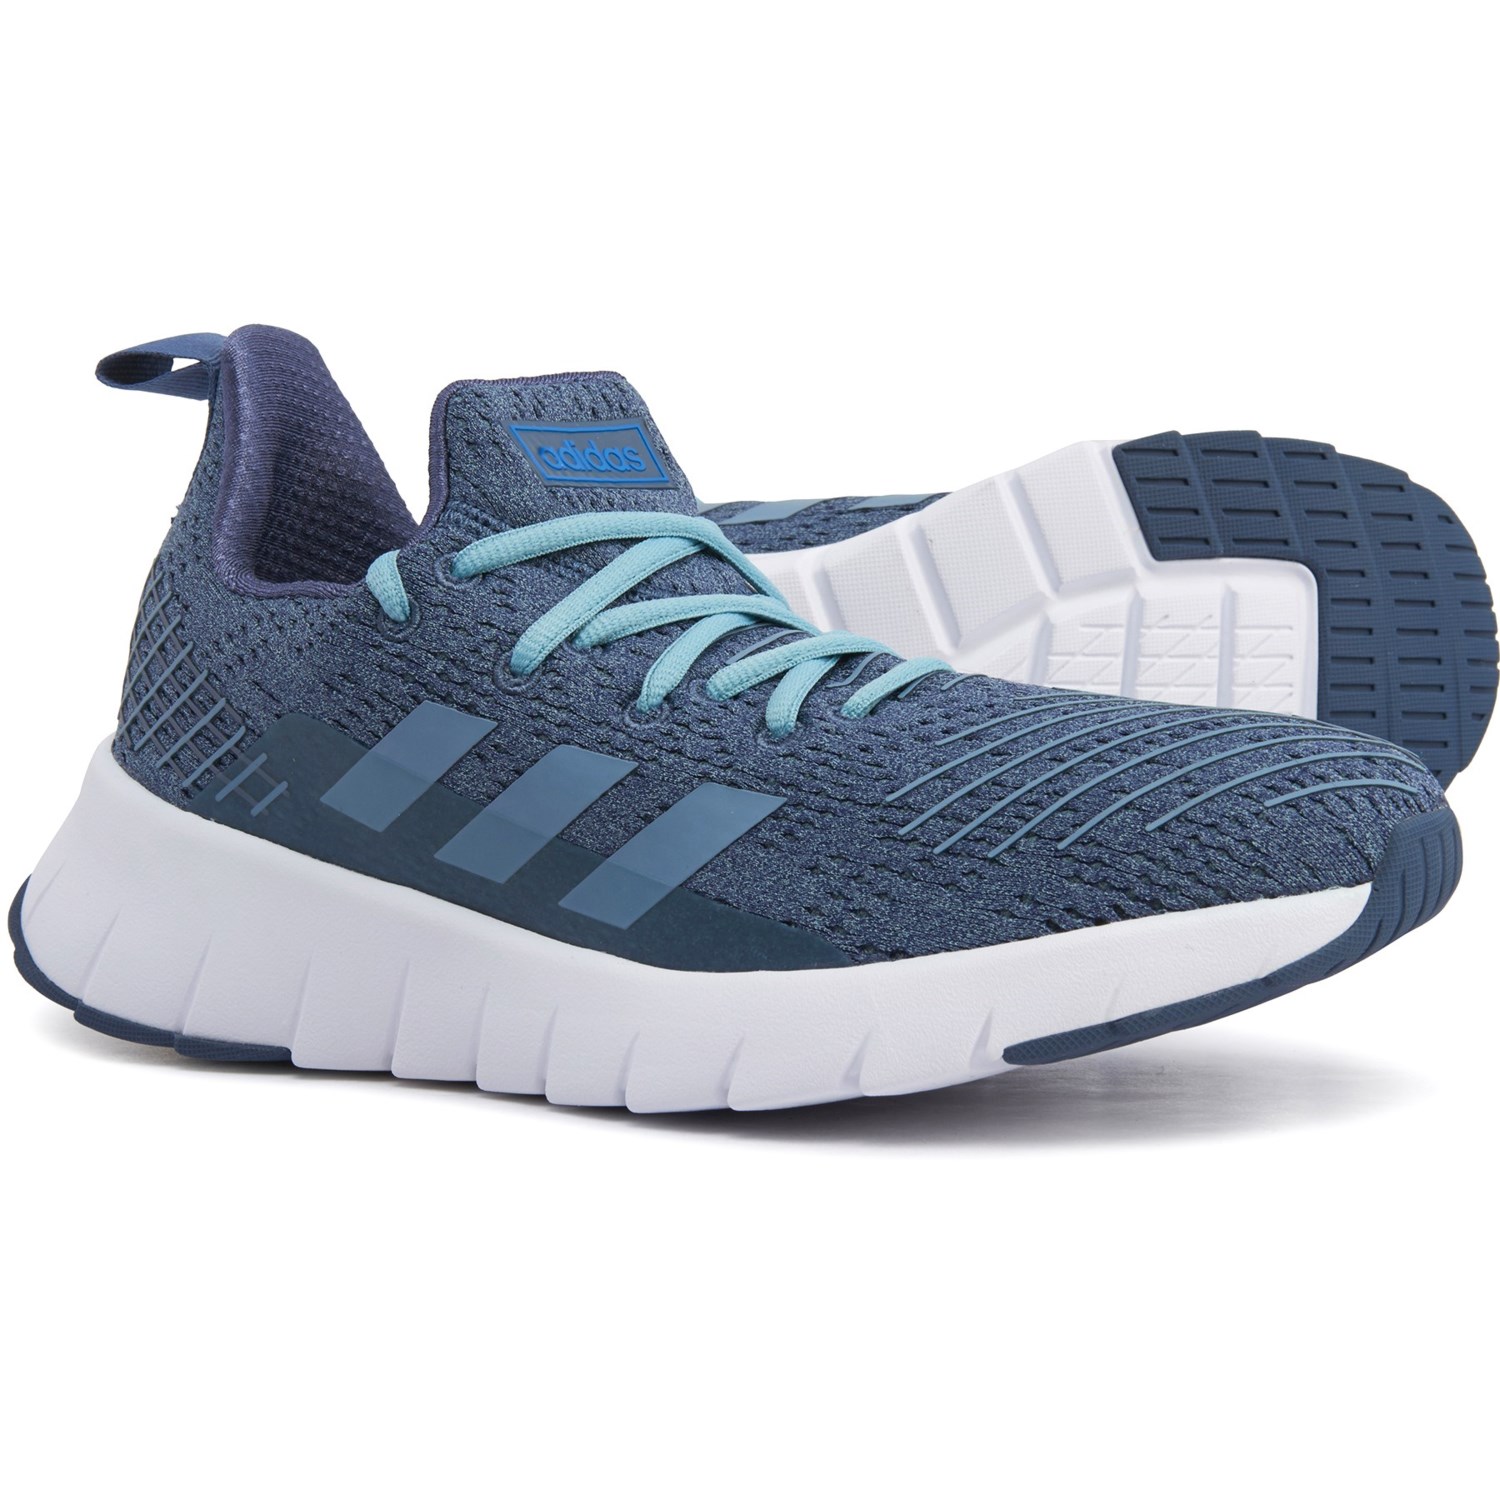 adidas Asweego Running Shoes (For Women 